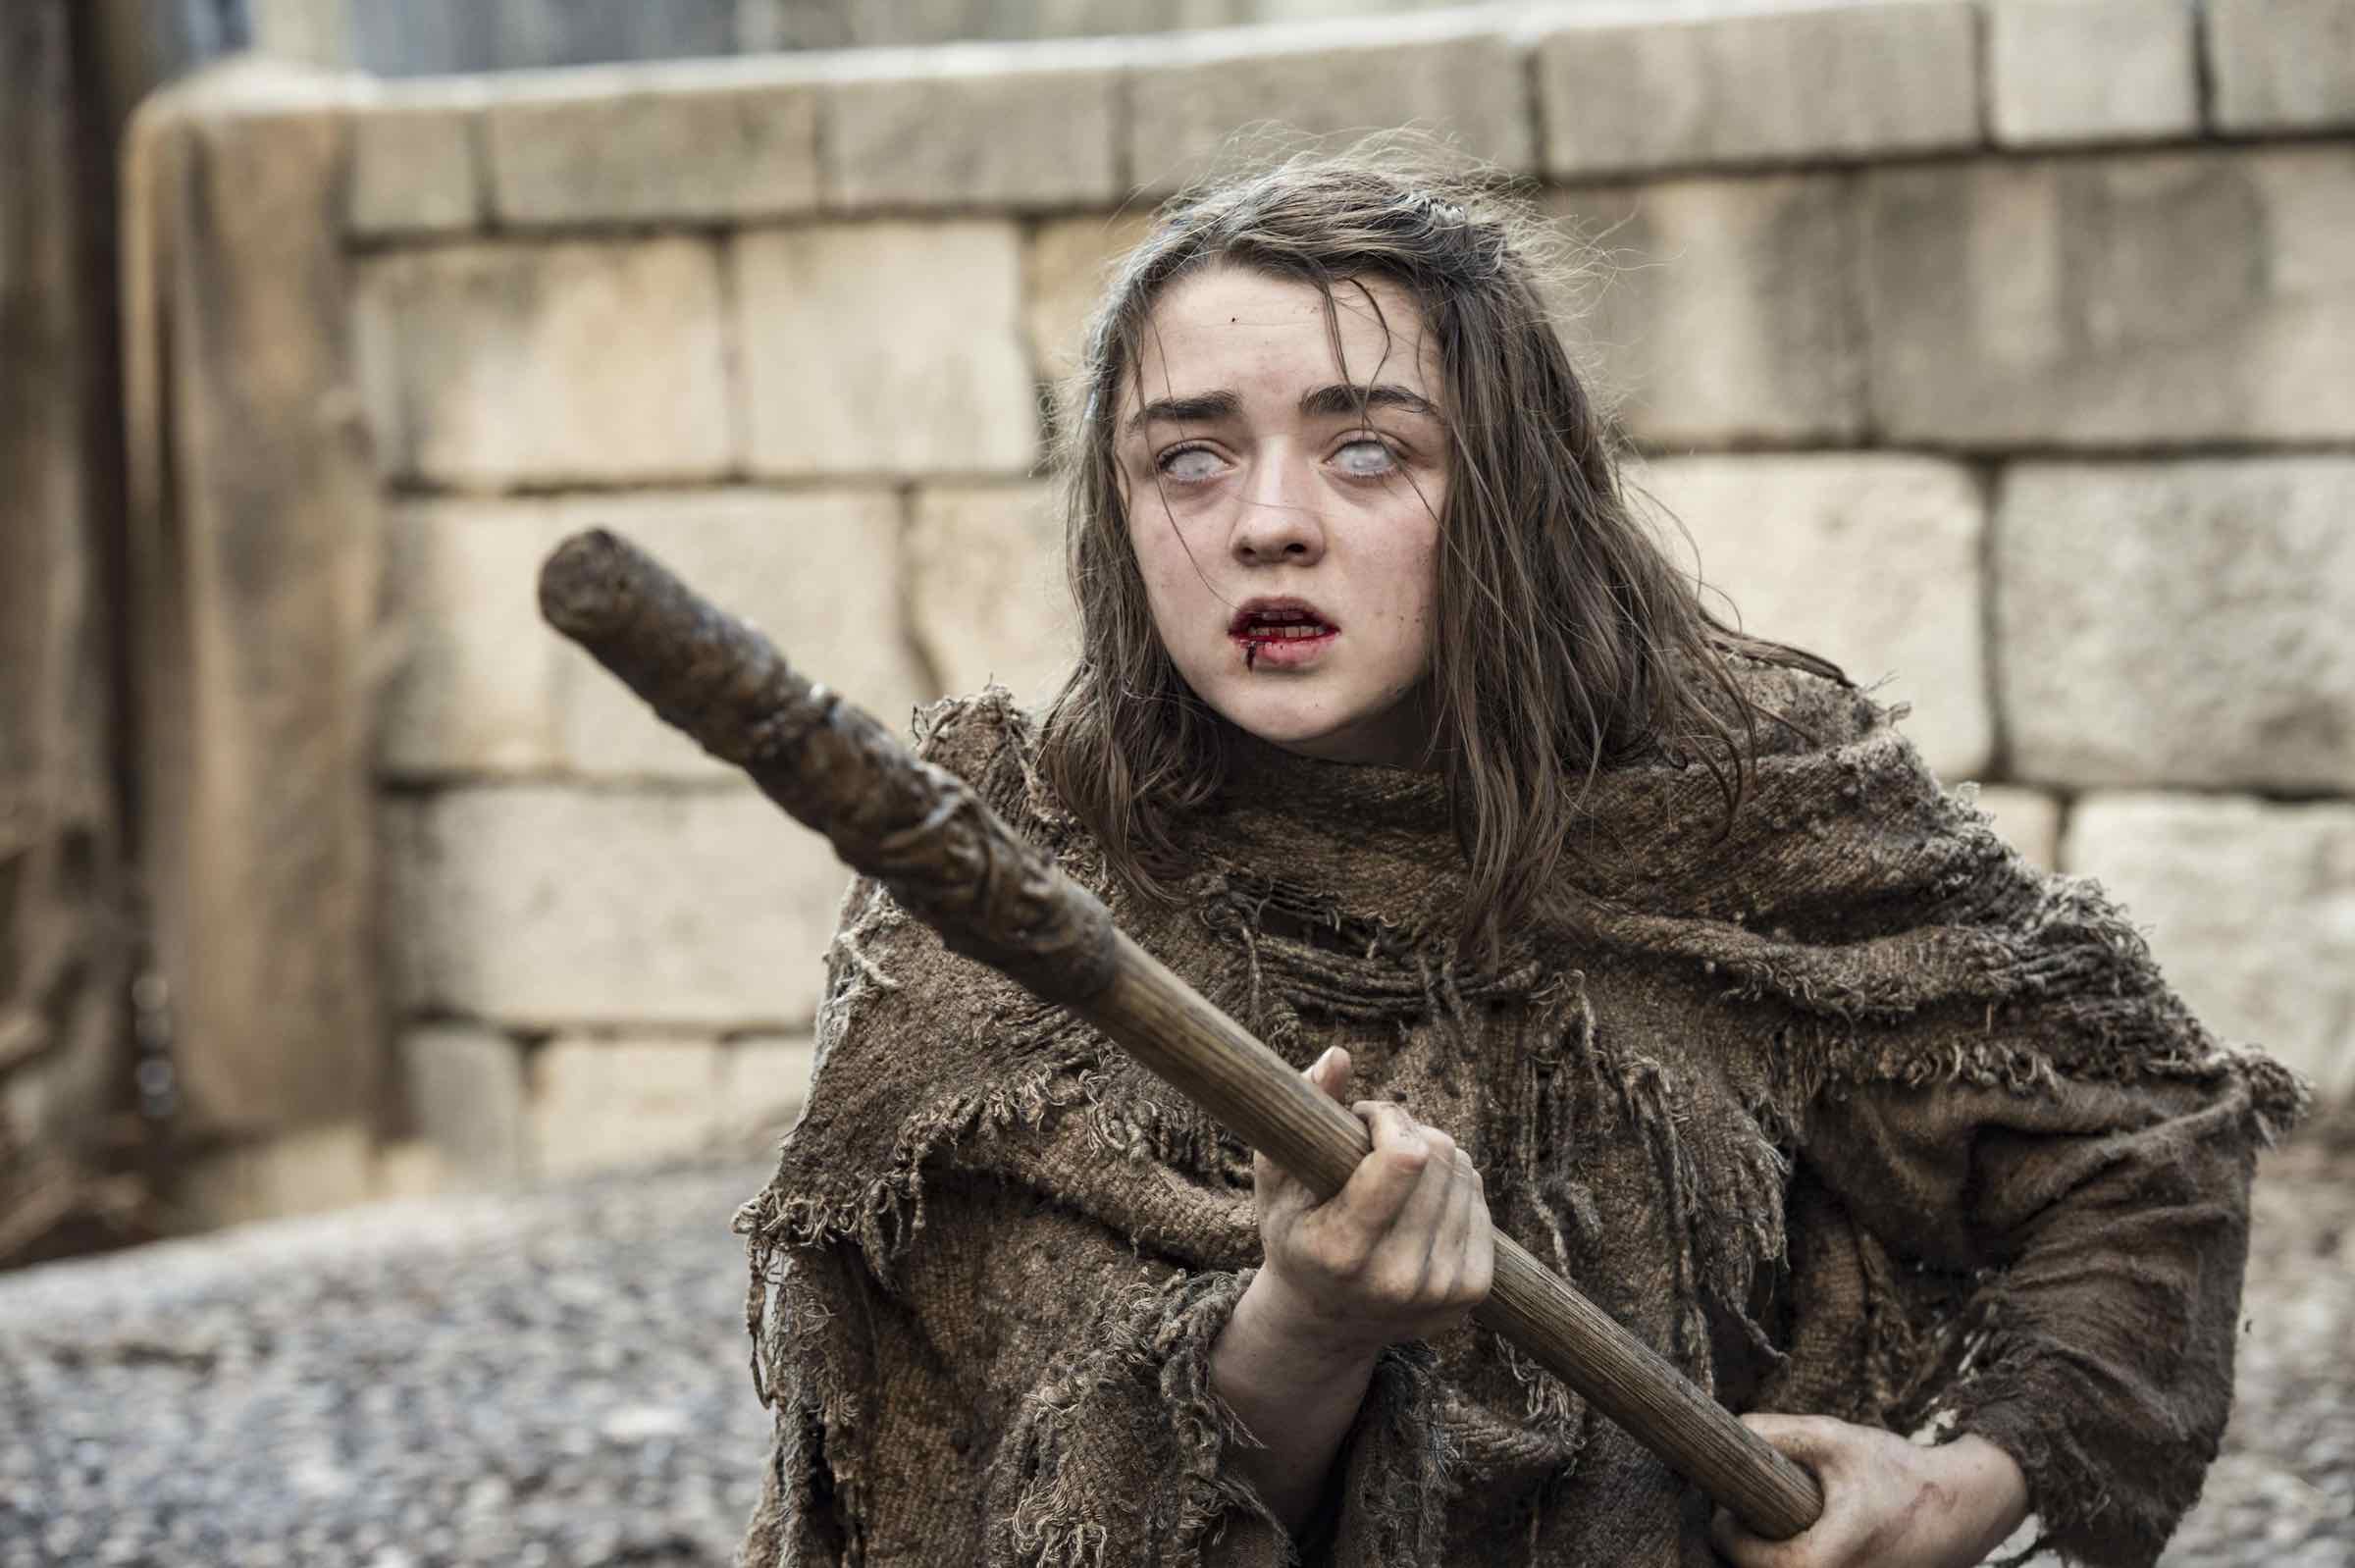 Here’s our list of all the 'Game of Thrones' characters still living that Arya has on her Kill List – and the likelihood she’ll get to off ‘em.